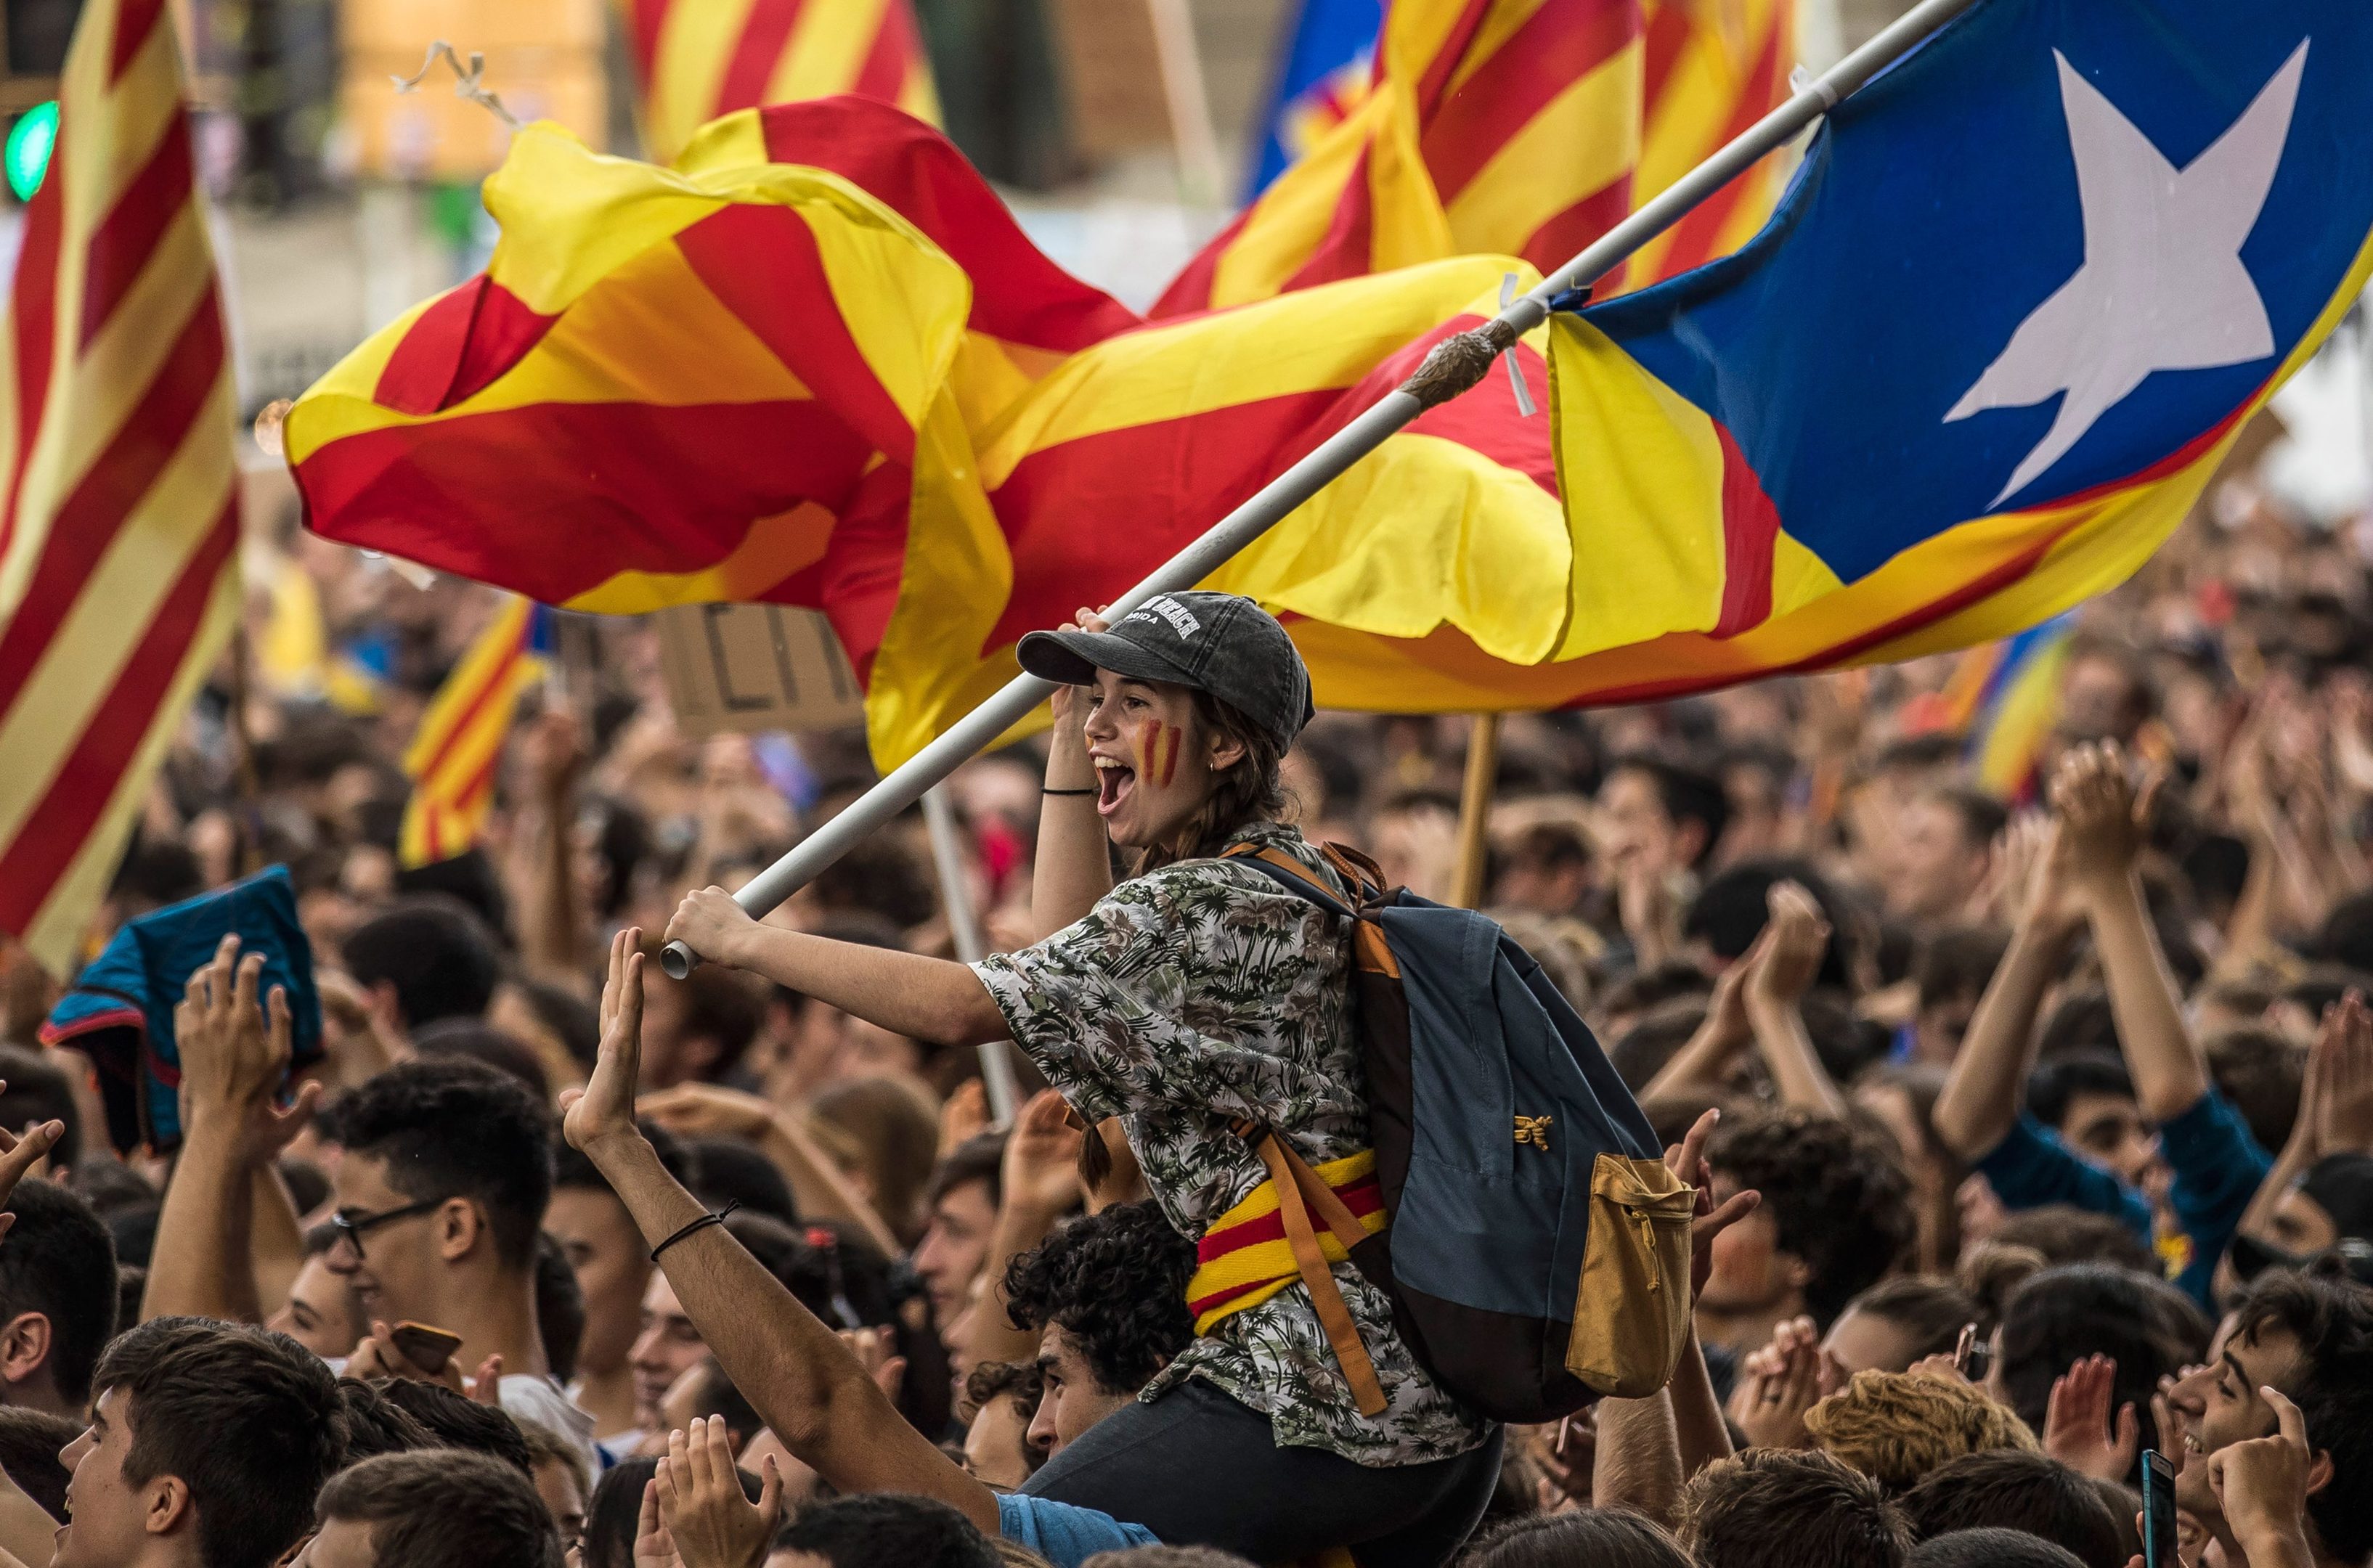 Students demonstrate against the position of the Spanish government to ban the Self-determination referendum of Catalonia during a university students strike on September 28, 2017 in Barcelona, Spain. (Dan Kitwood/Getty Images)